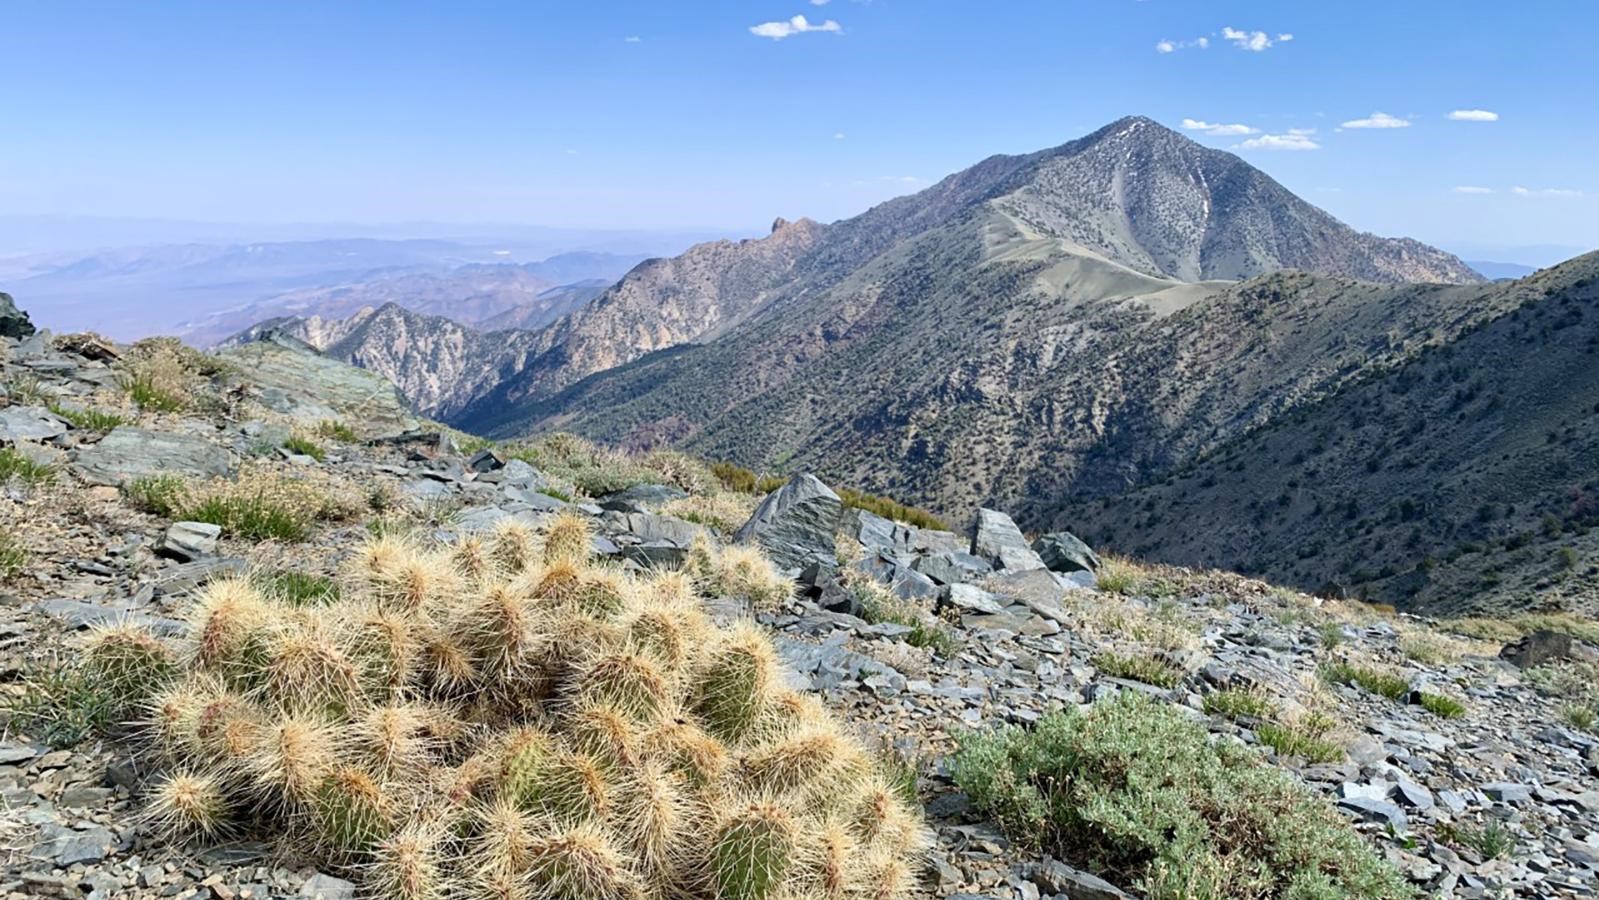 a cactus in the front with a prominent mountain behind